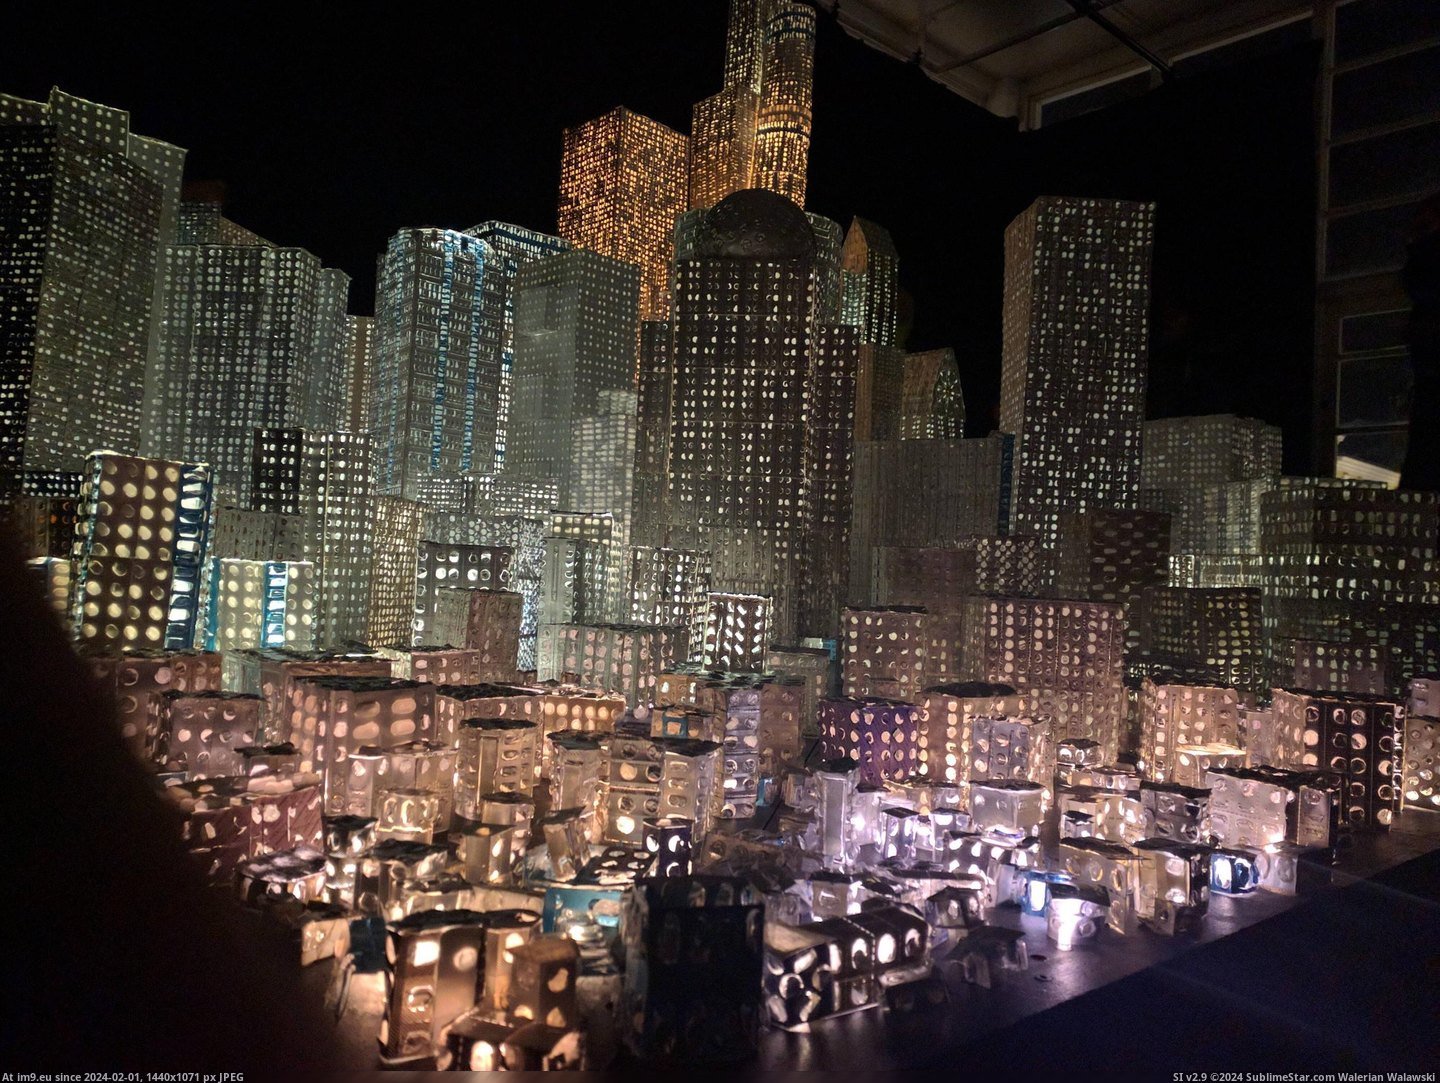 [Mildlyinteresting] This cityscape is made of pill wrappers (in My r/MILDLYINTERESTING favs)